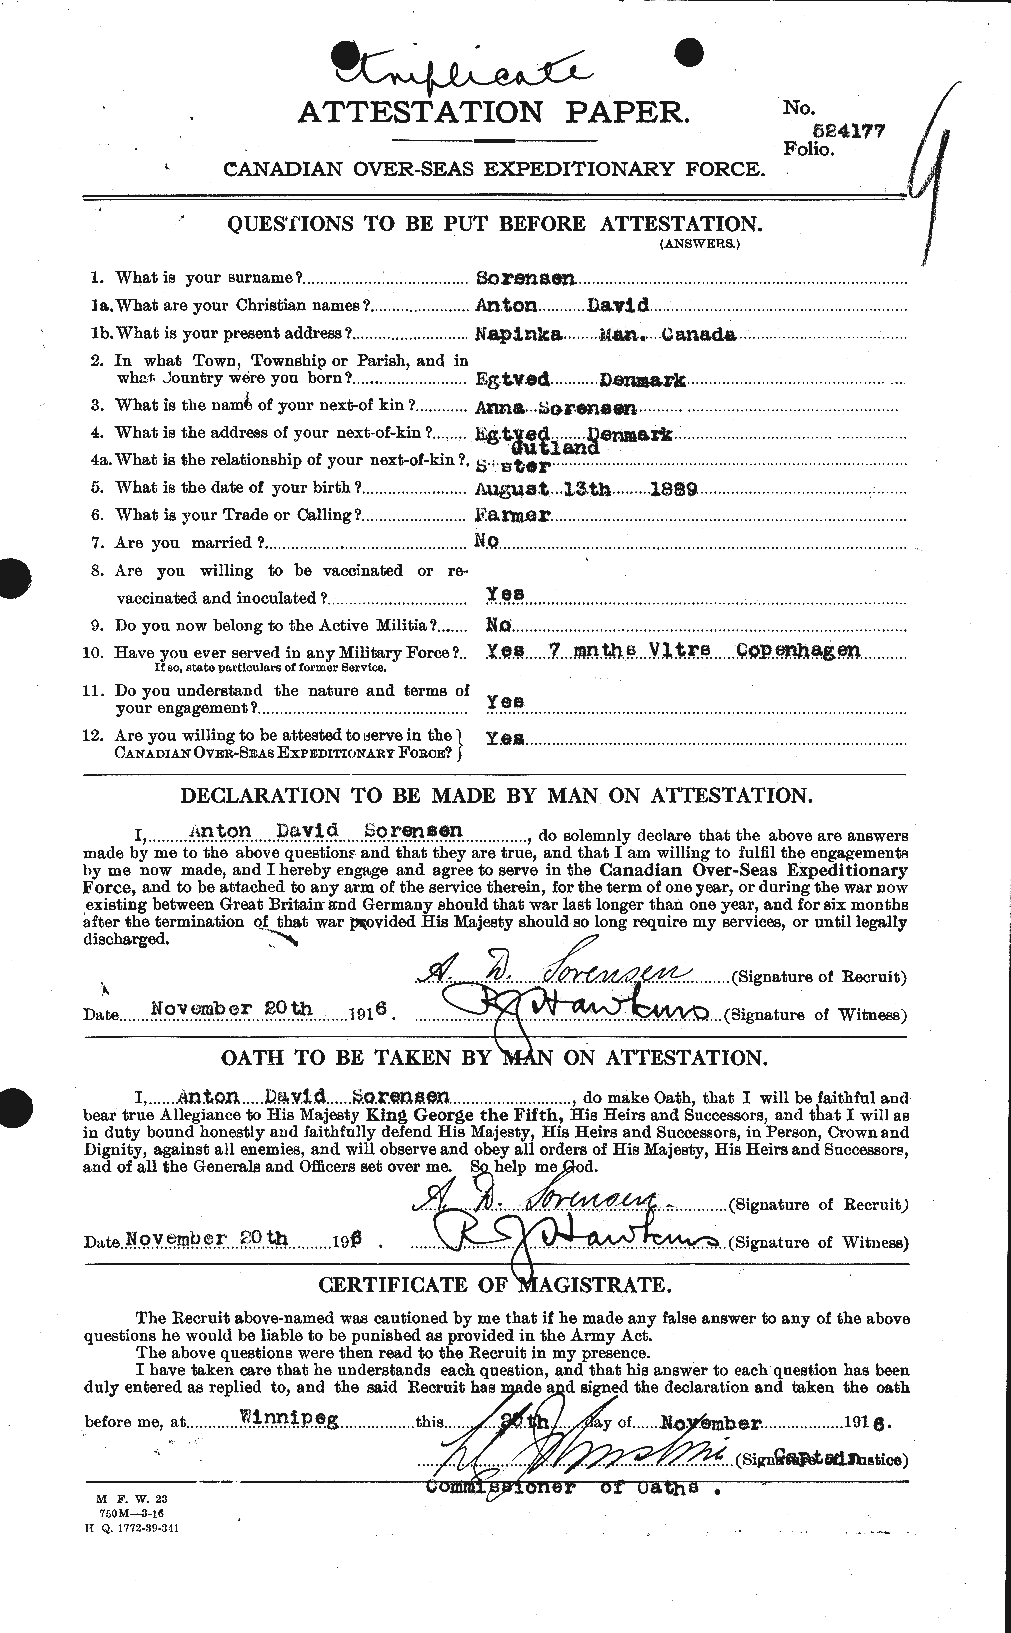 Personnel Records of the First World War - CEF 110167a